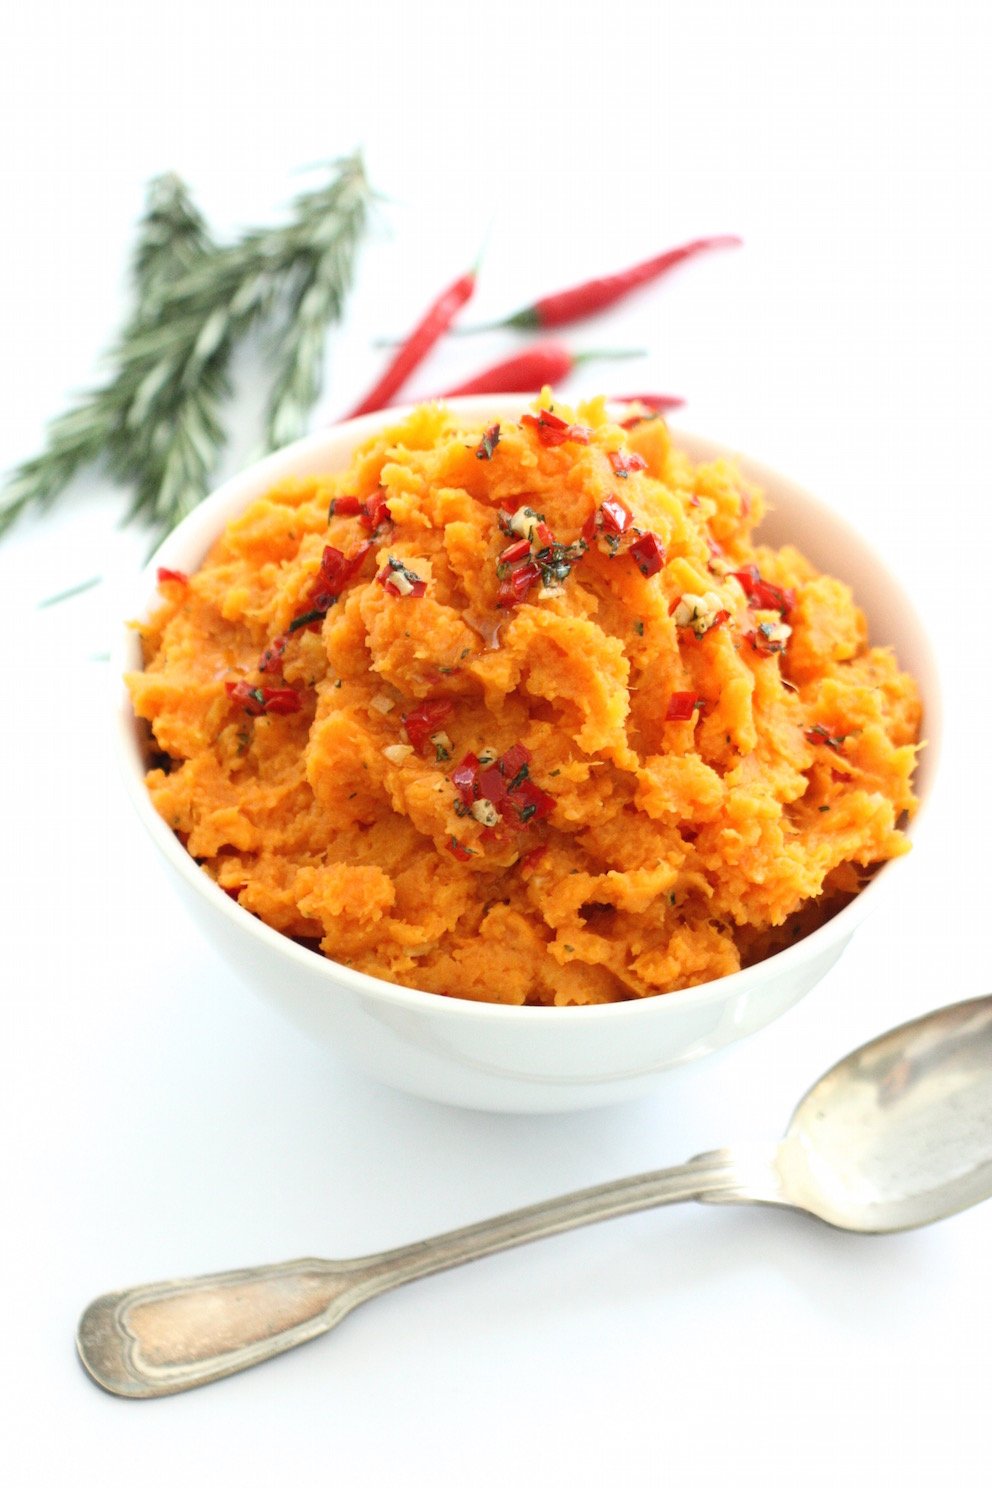 This Sweet Potato Mash is a great Christmas side dish to prepare ahead